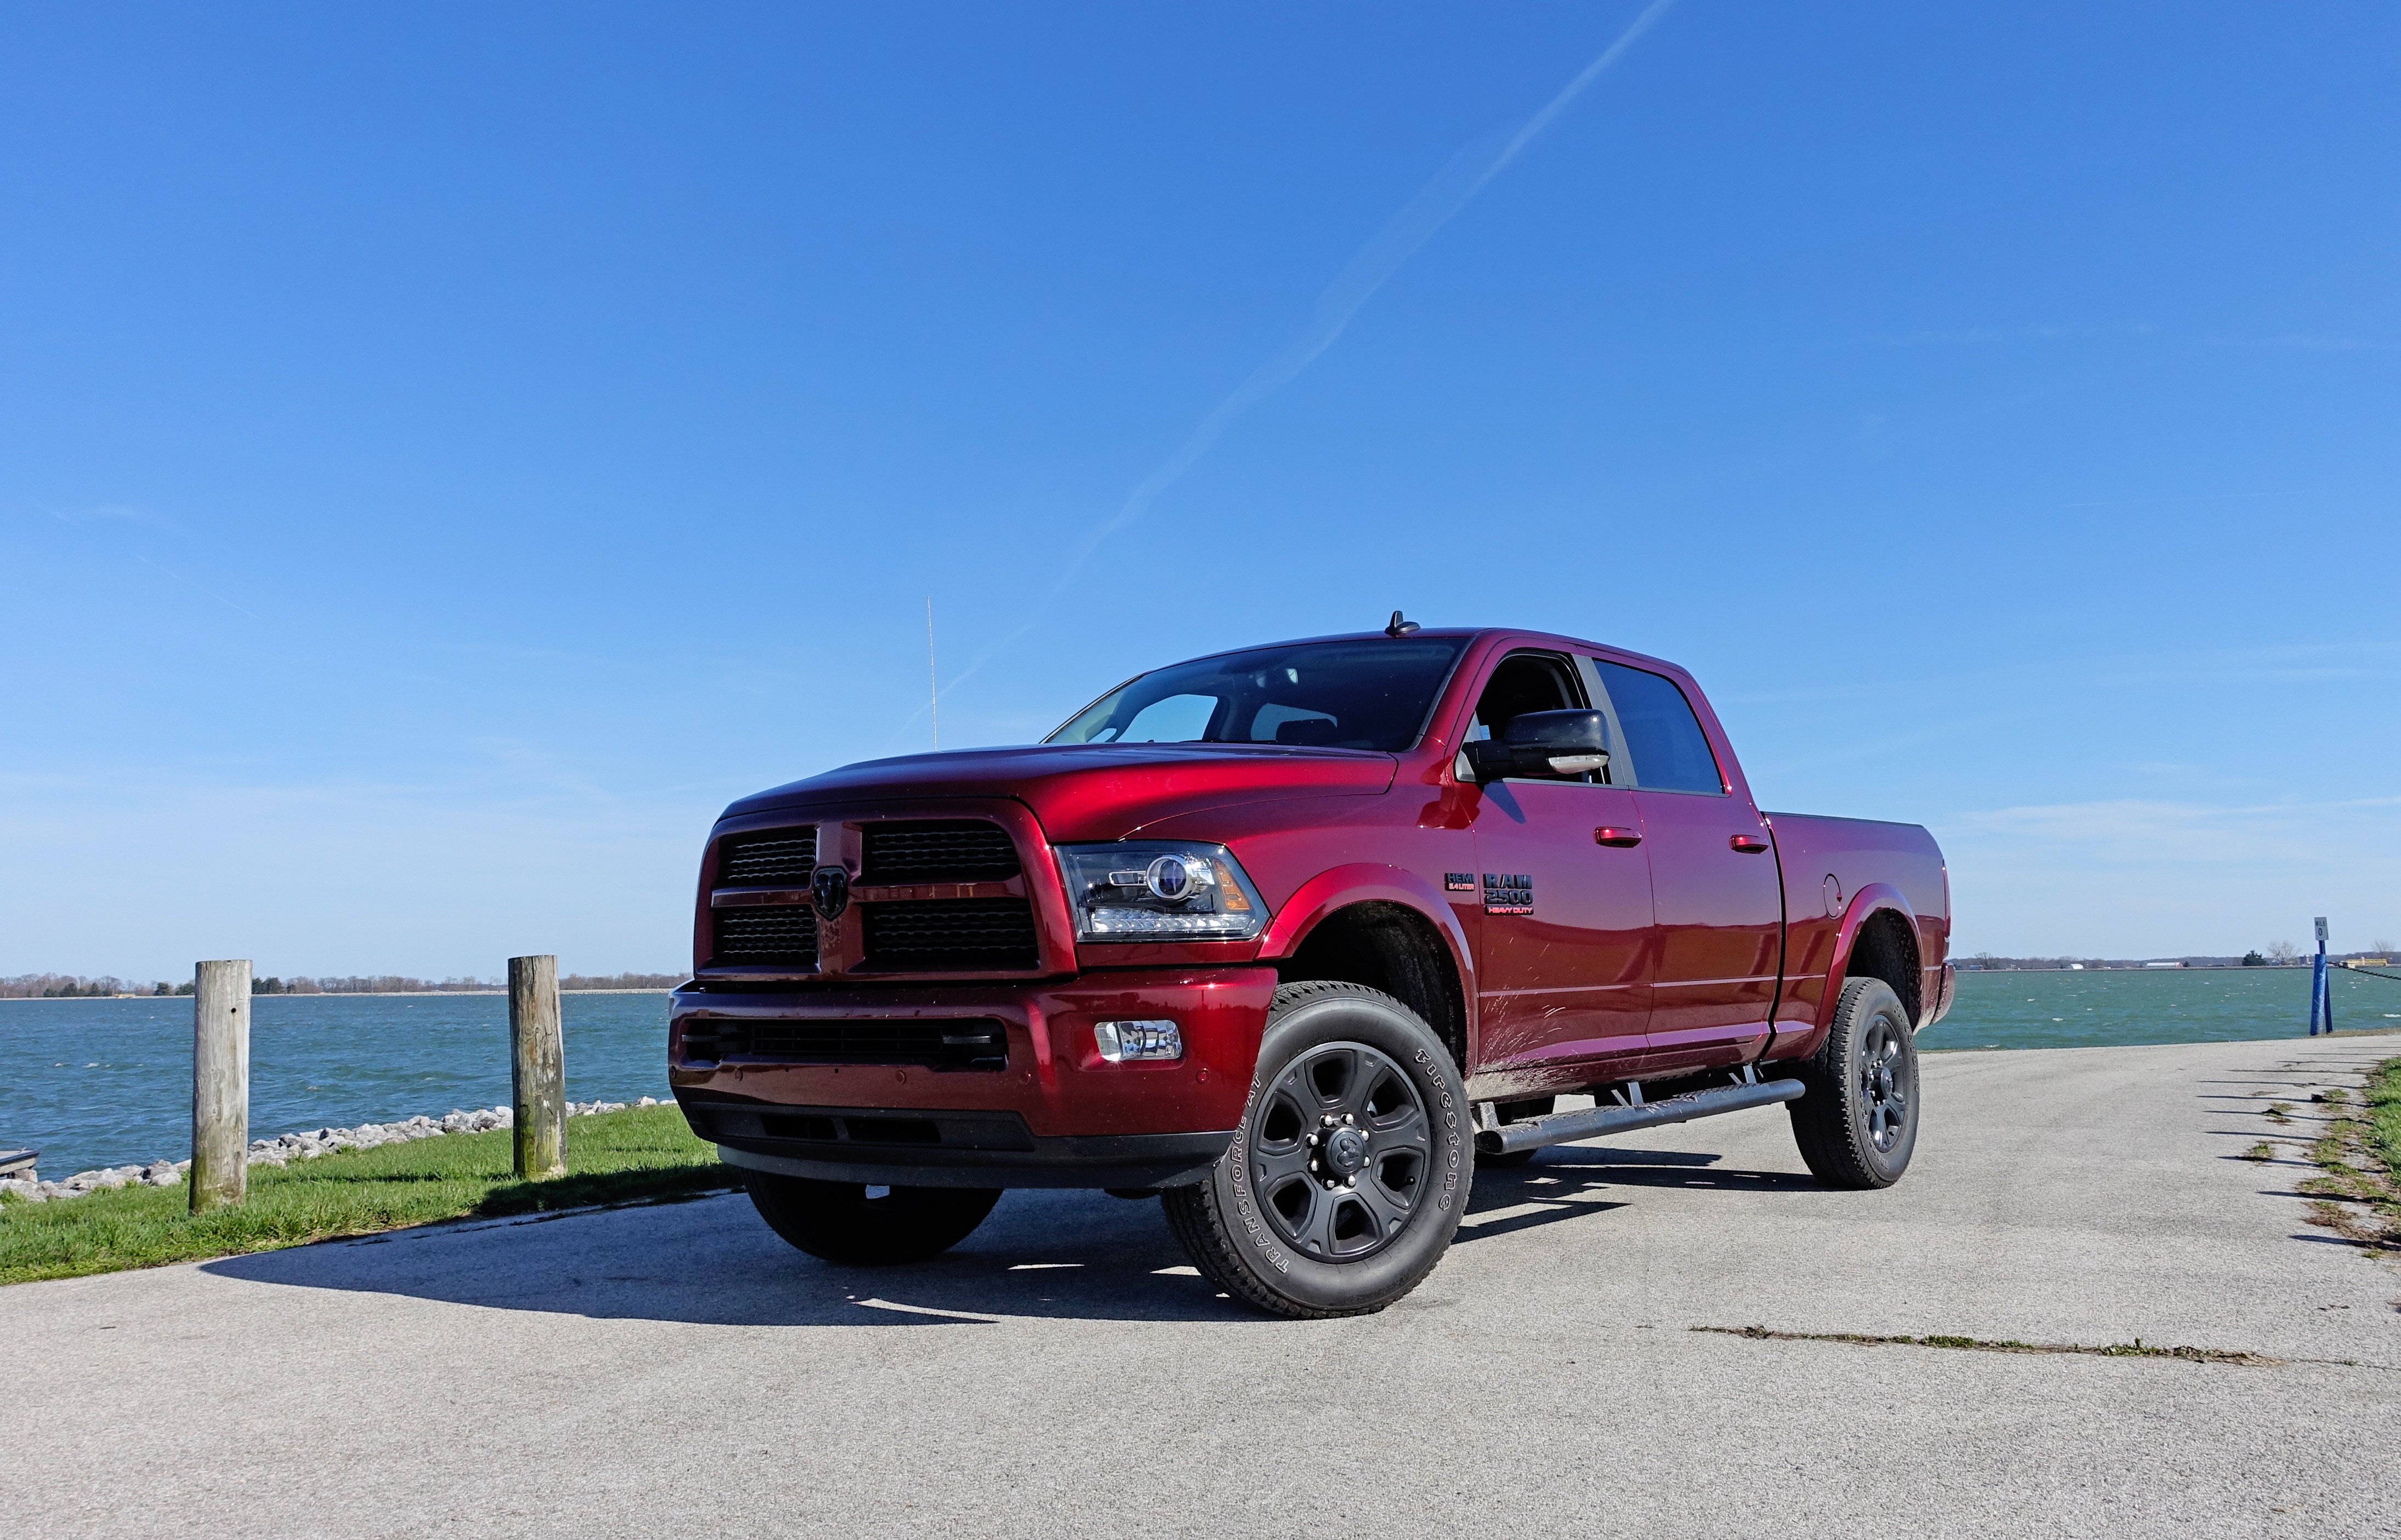 The 2017 RAM 2500 offers bold looks with the Sport appearance package.